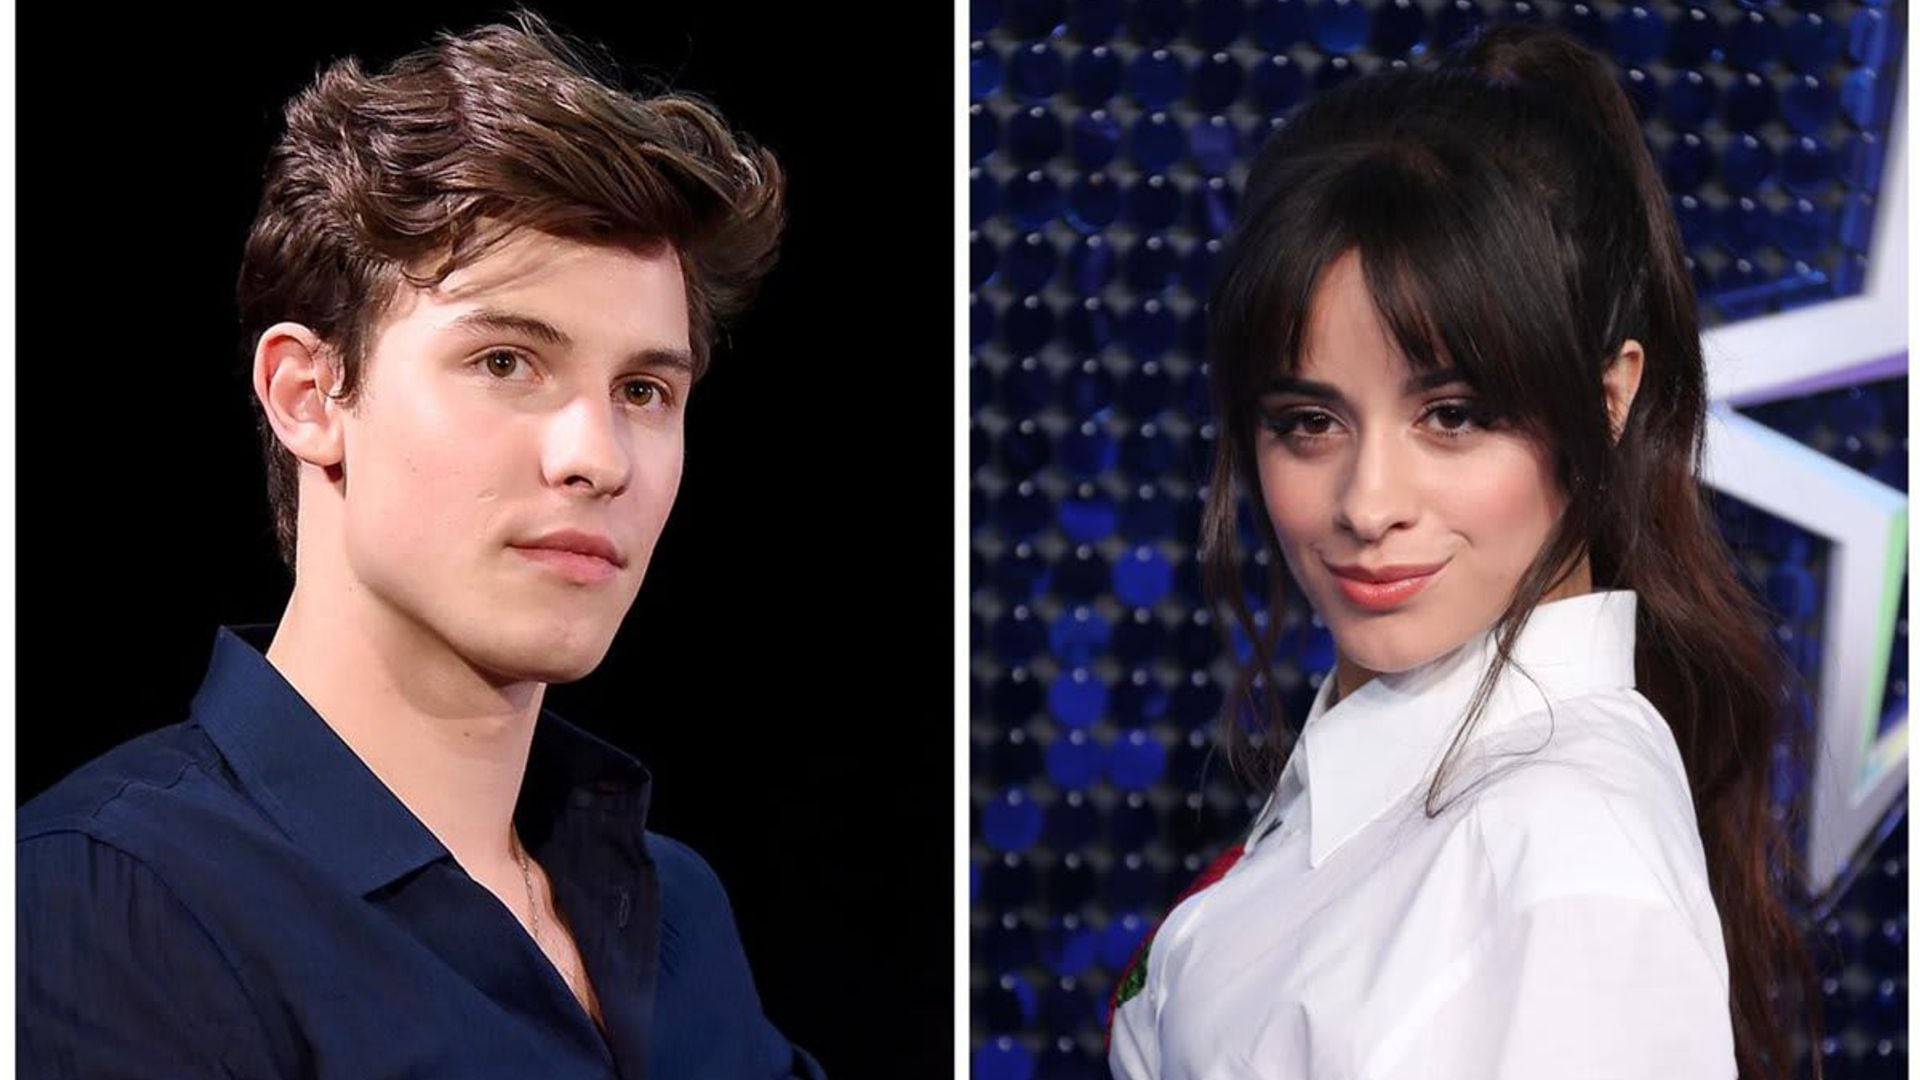 Shawn Mendes reveals how he resolve 'the worst little arguments' with girlfriend Camila Cabello